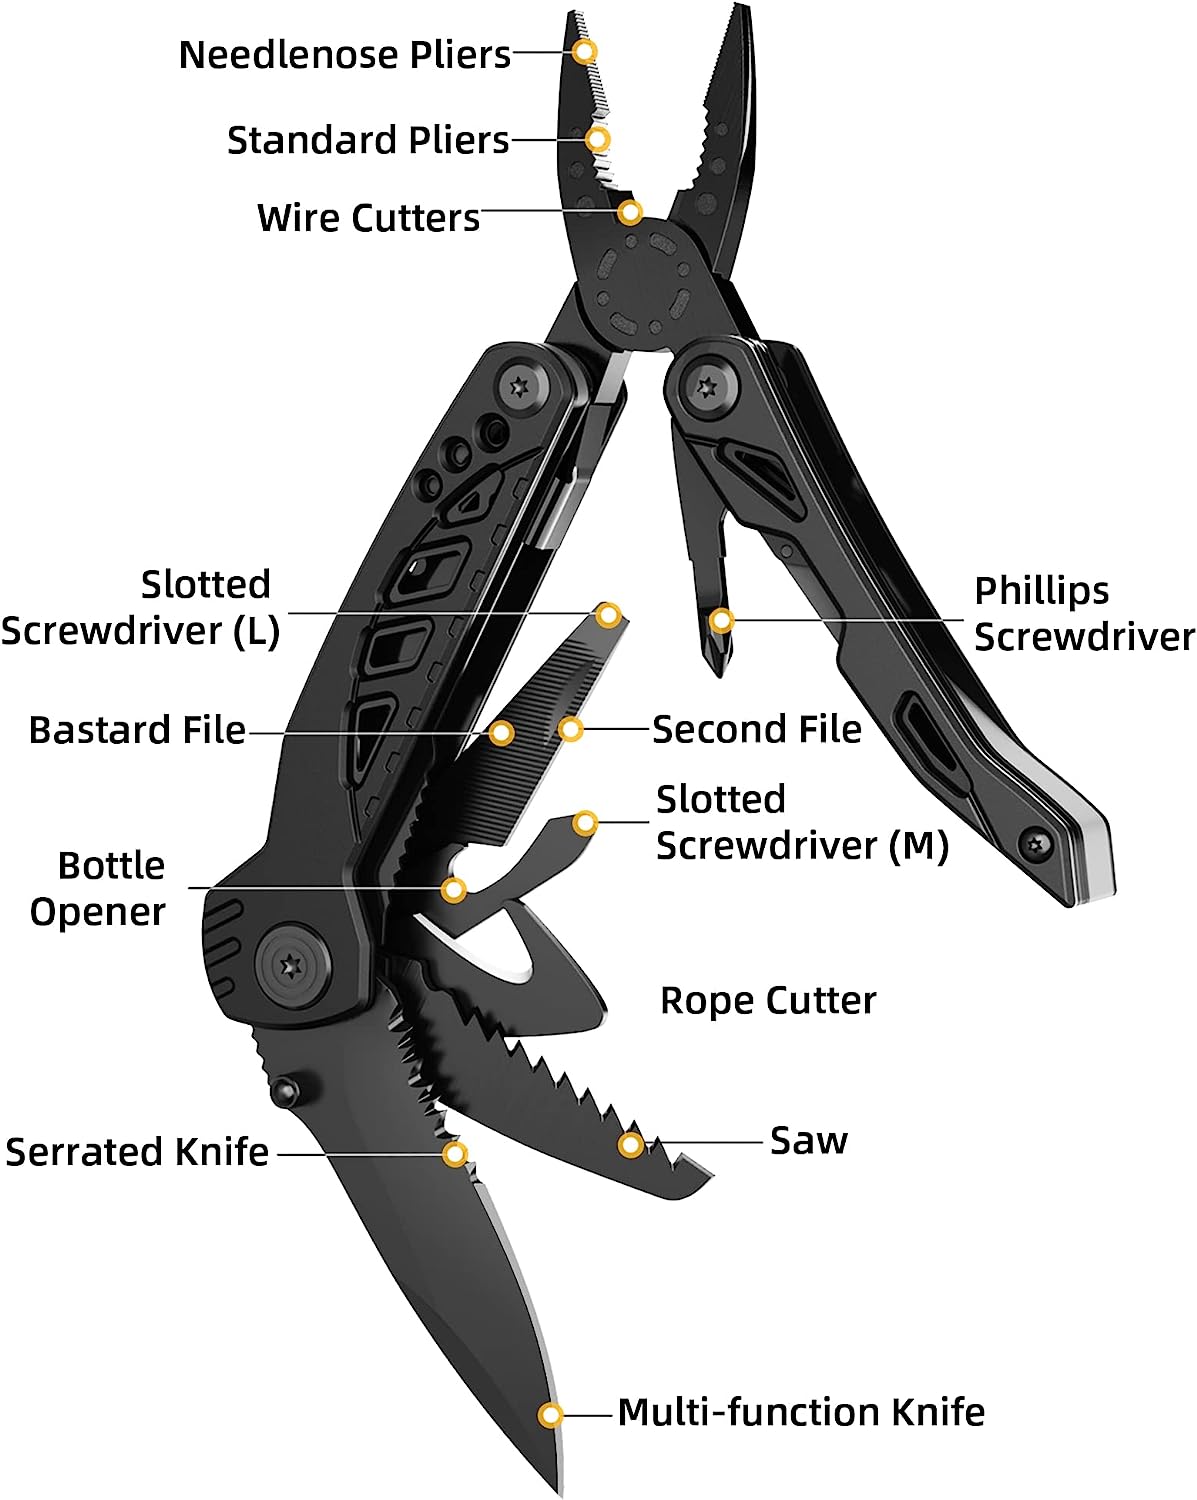 Multitool Knife, Pohaku 13 in 1 Pocket Multitool, Multi Tool with 3" Large Blade, Safety Locking Design, Spring-Action Plier, Durable Nylon Sheath for Outdoor, Camping, Fishing, Survival,Hiking